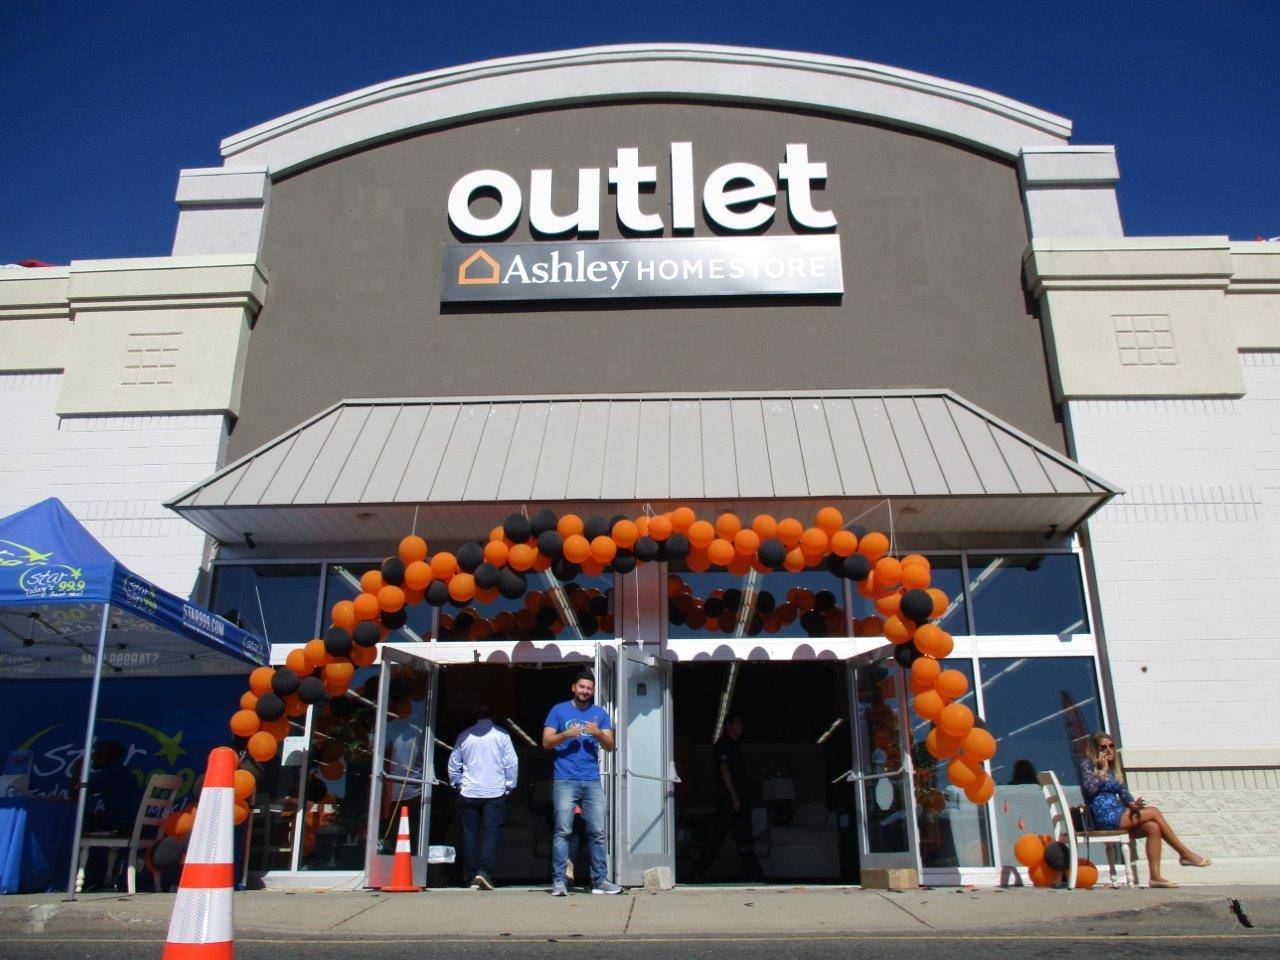 Ashley Homestore Outlet Grand Opening 9/27/19